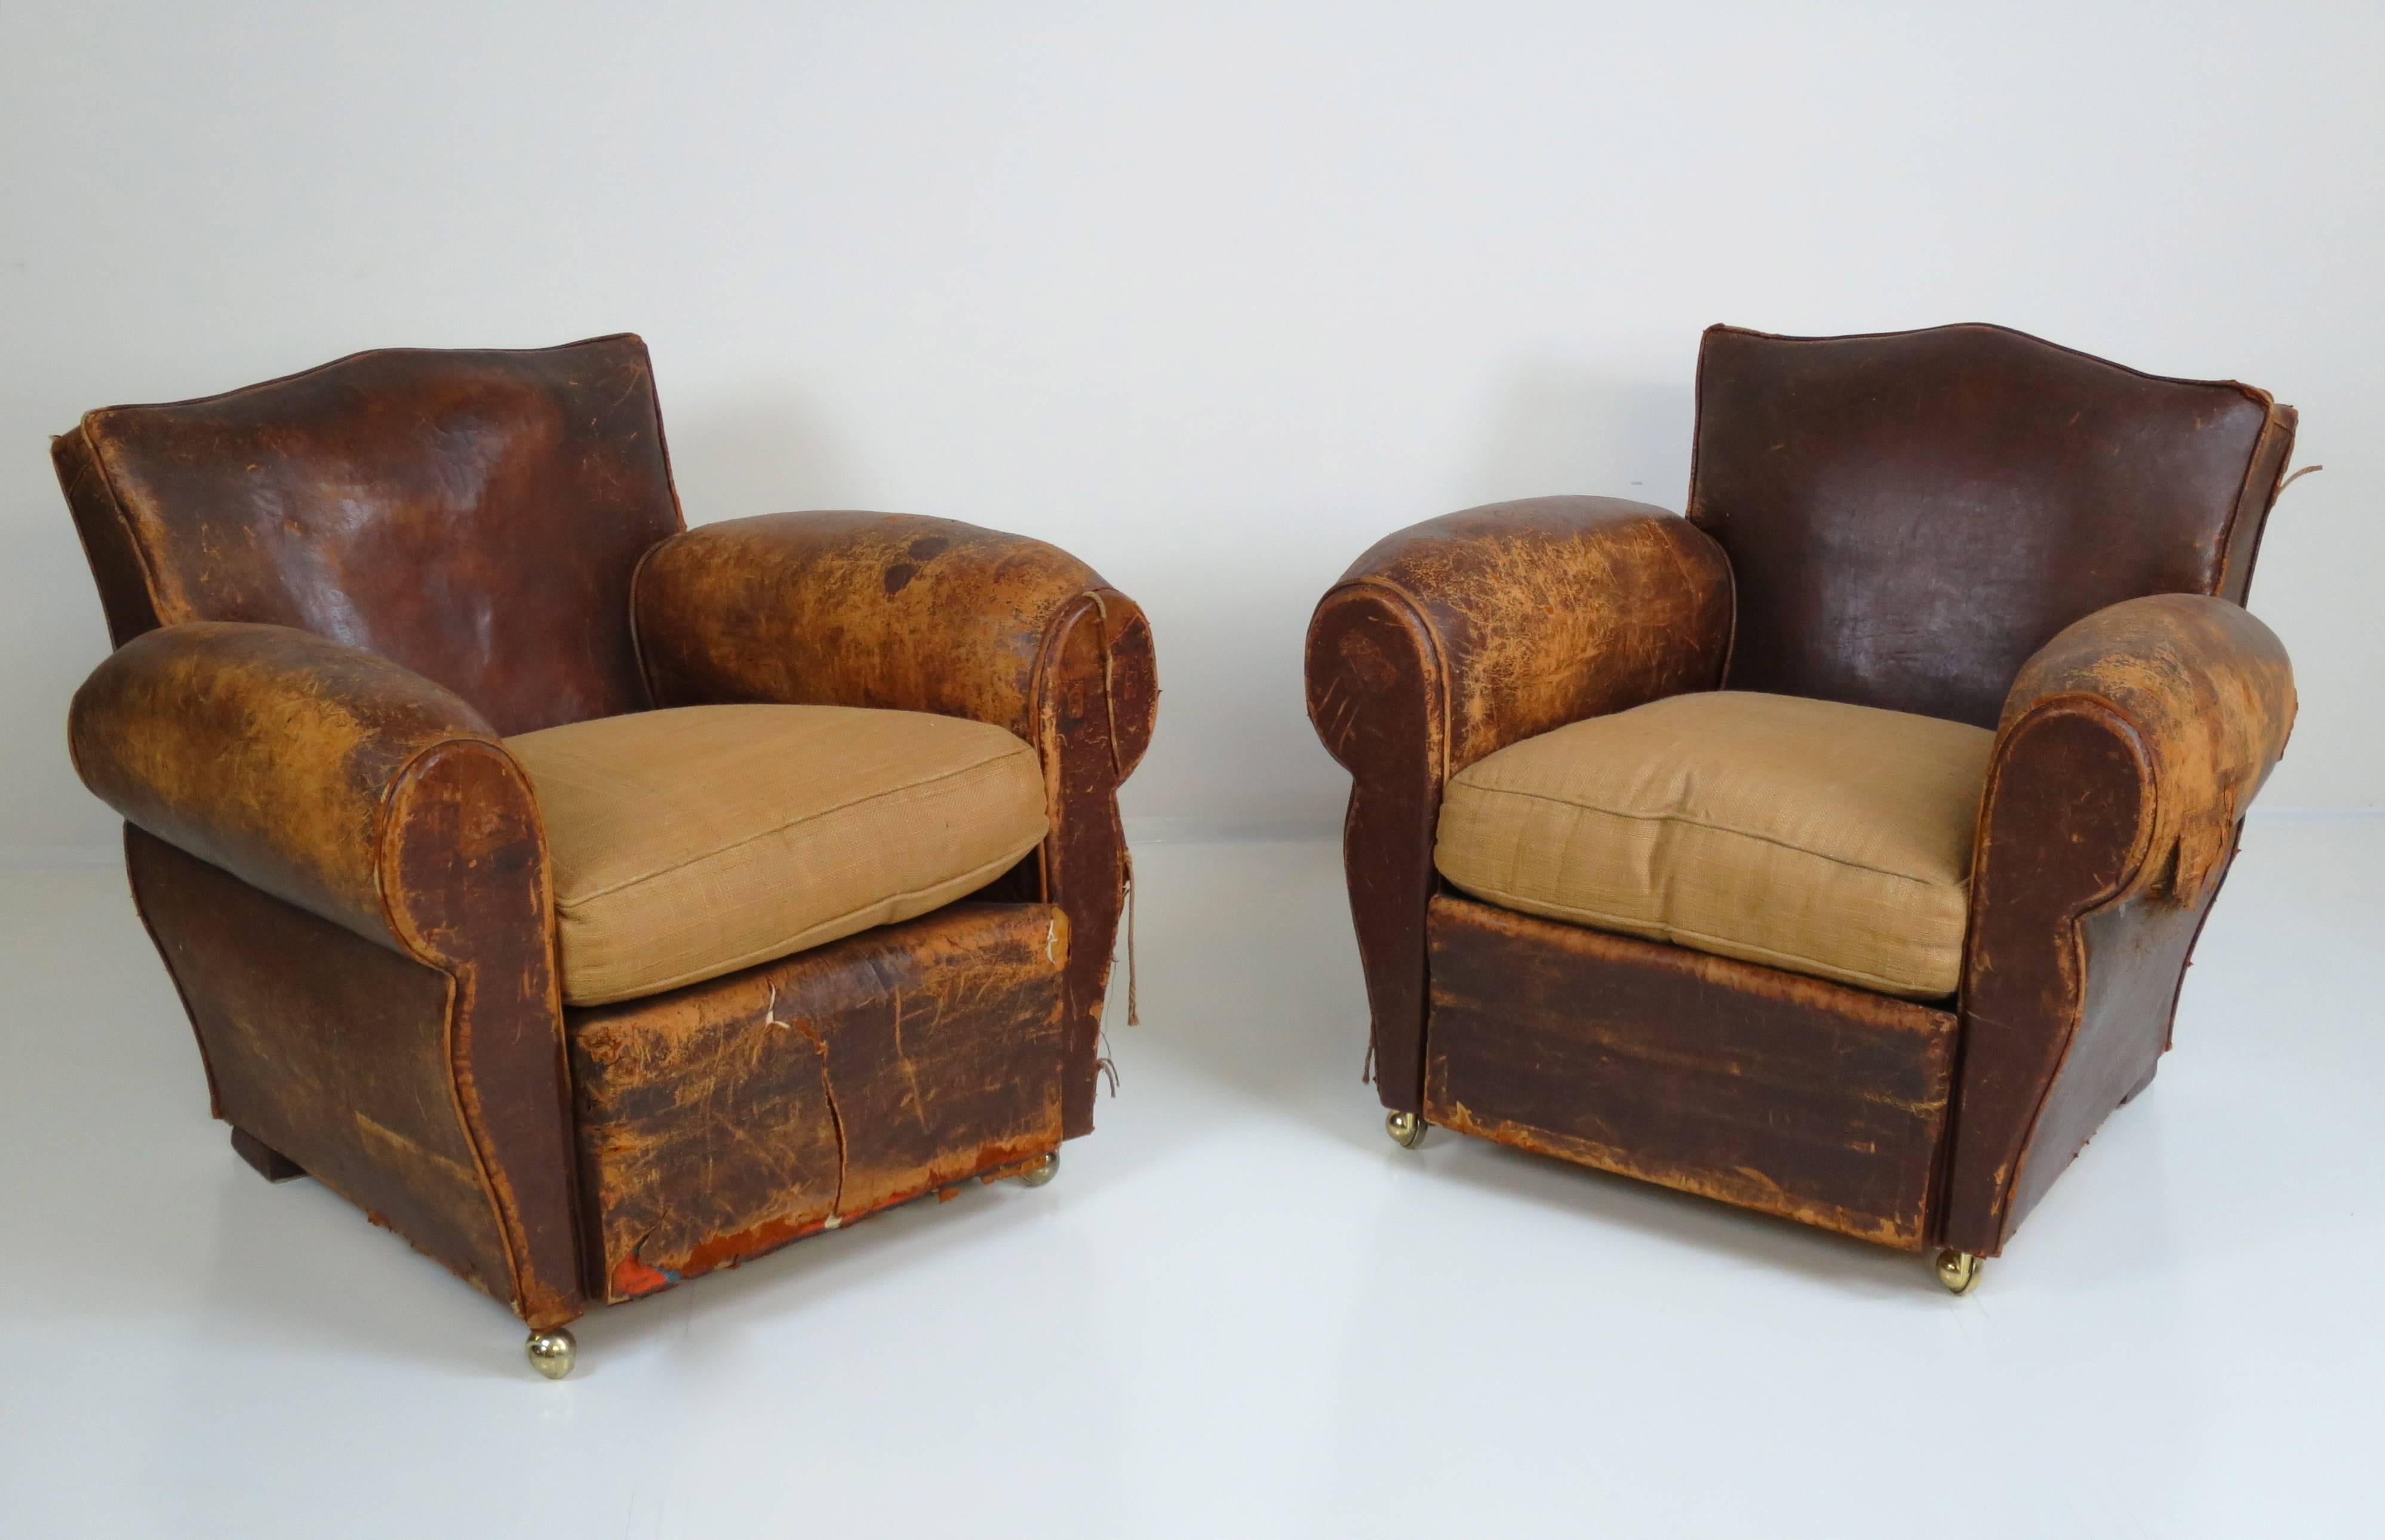 Pair of French Art Deco club chairs. Distressed leather with original patina.